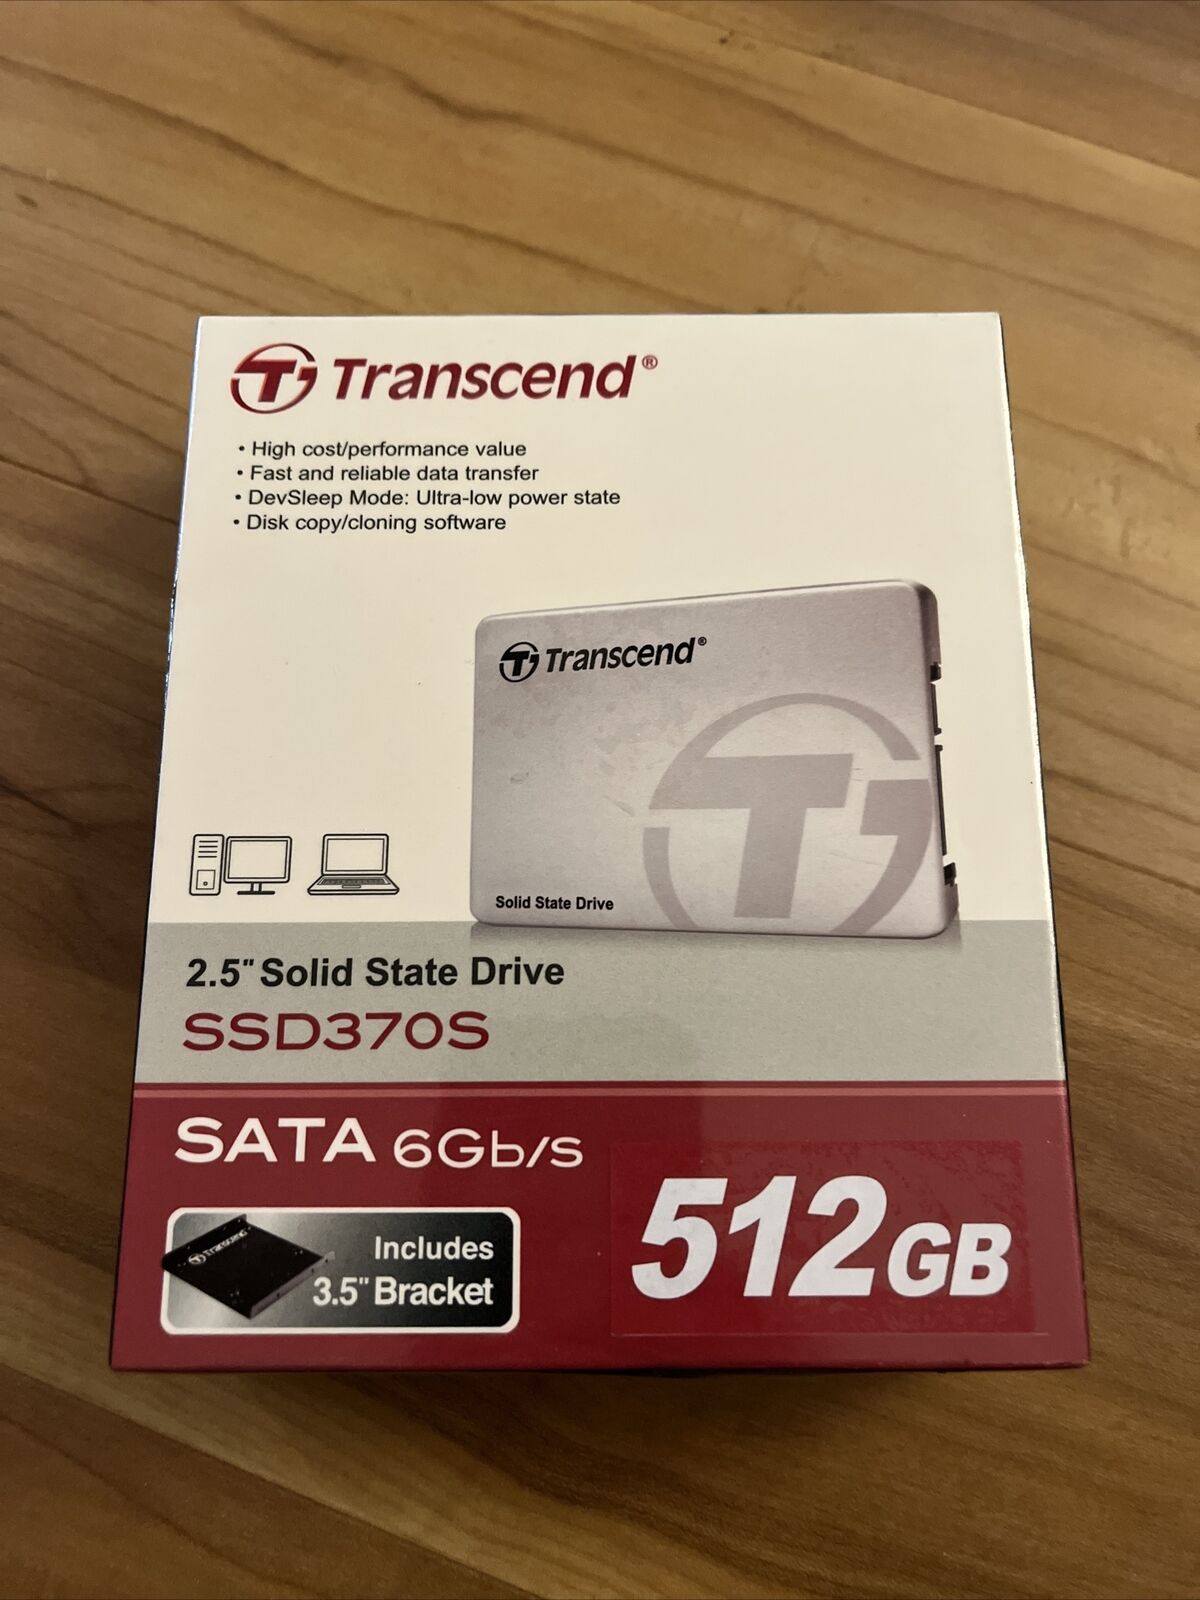 New Transcend Solid State Drive 512GB SSD 370S TS512GSSD370S Sata Interface